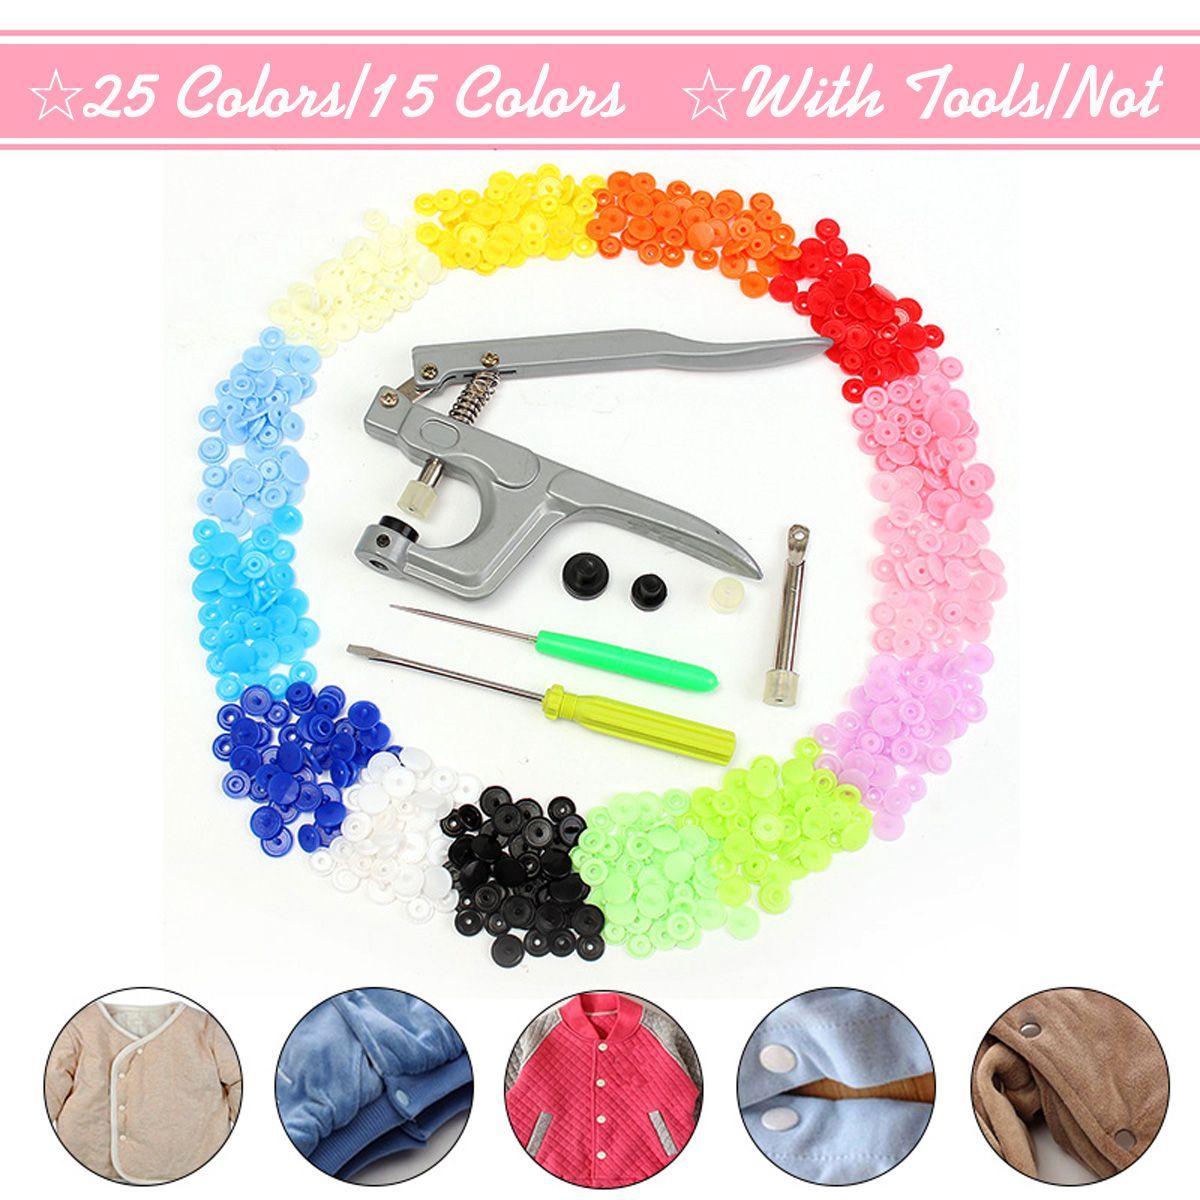 375-Sets-T5-Snap-Poppers-Fasteners-Plastic-Buttons-25-colors-Pliers-Punching-Tool-1568039